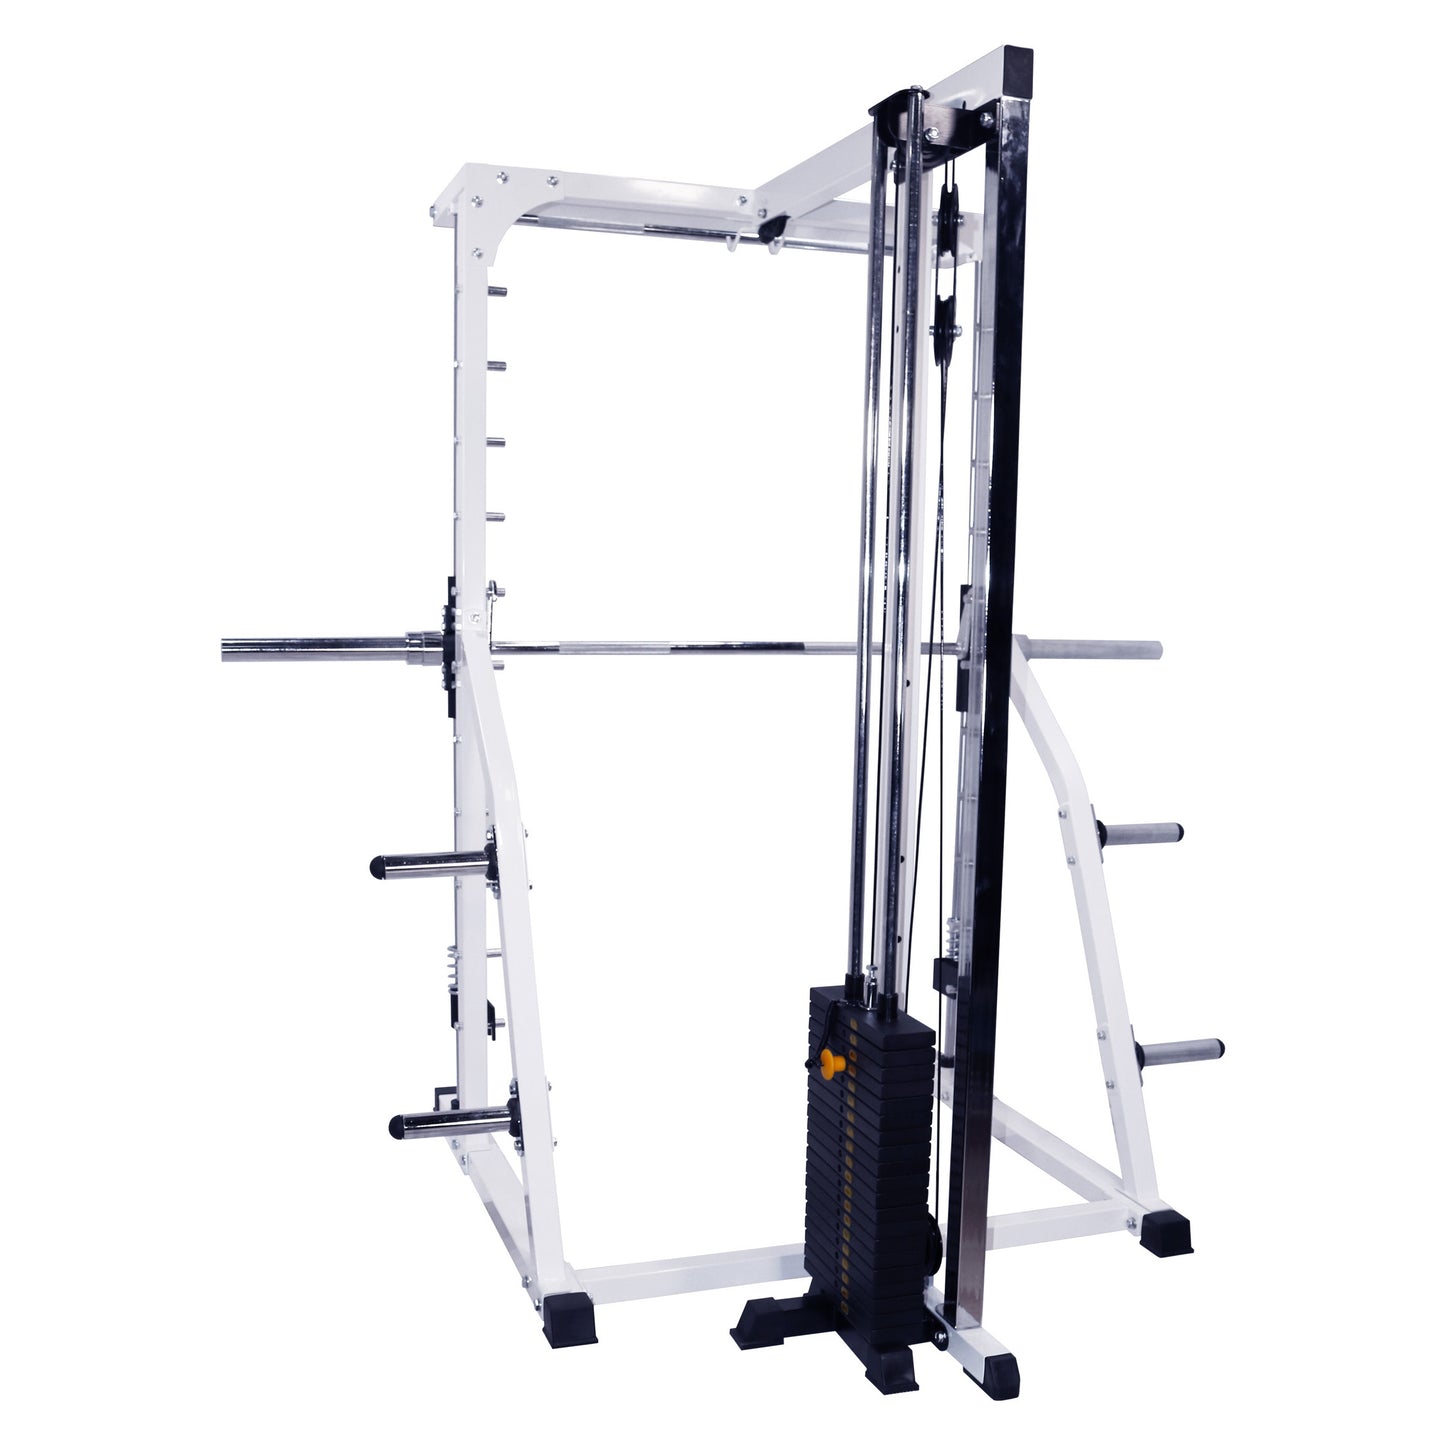 Linear Bearing Smith Machine with Weight Stack Loaded Lat Attachment (DF4900LS)